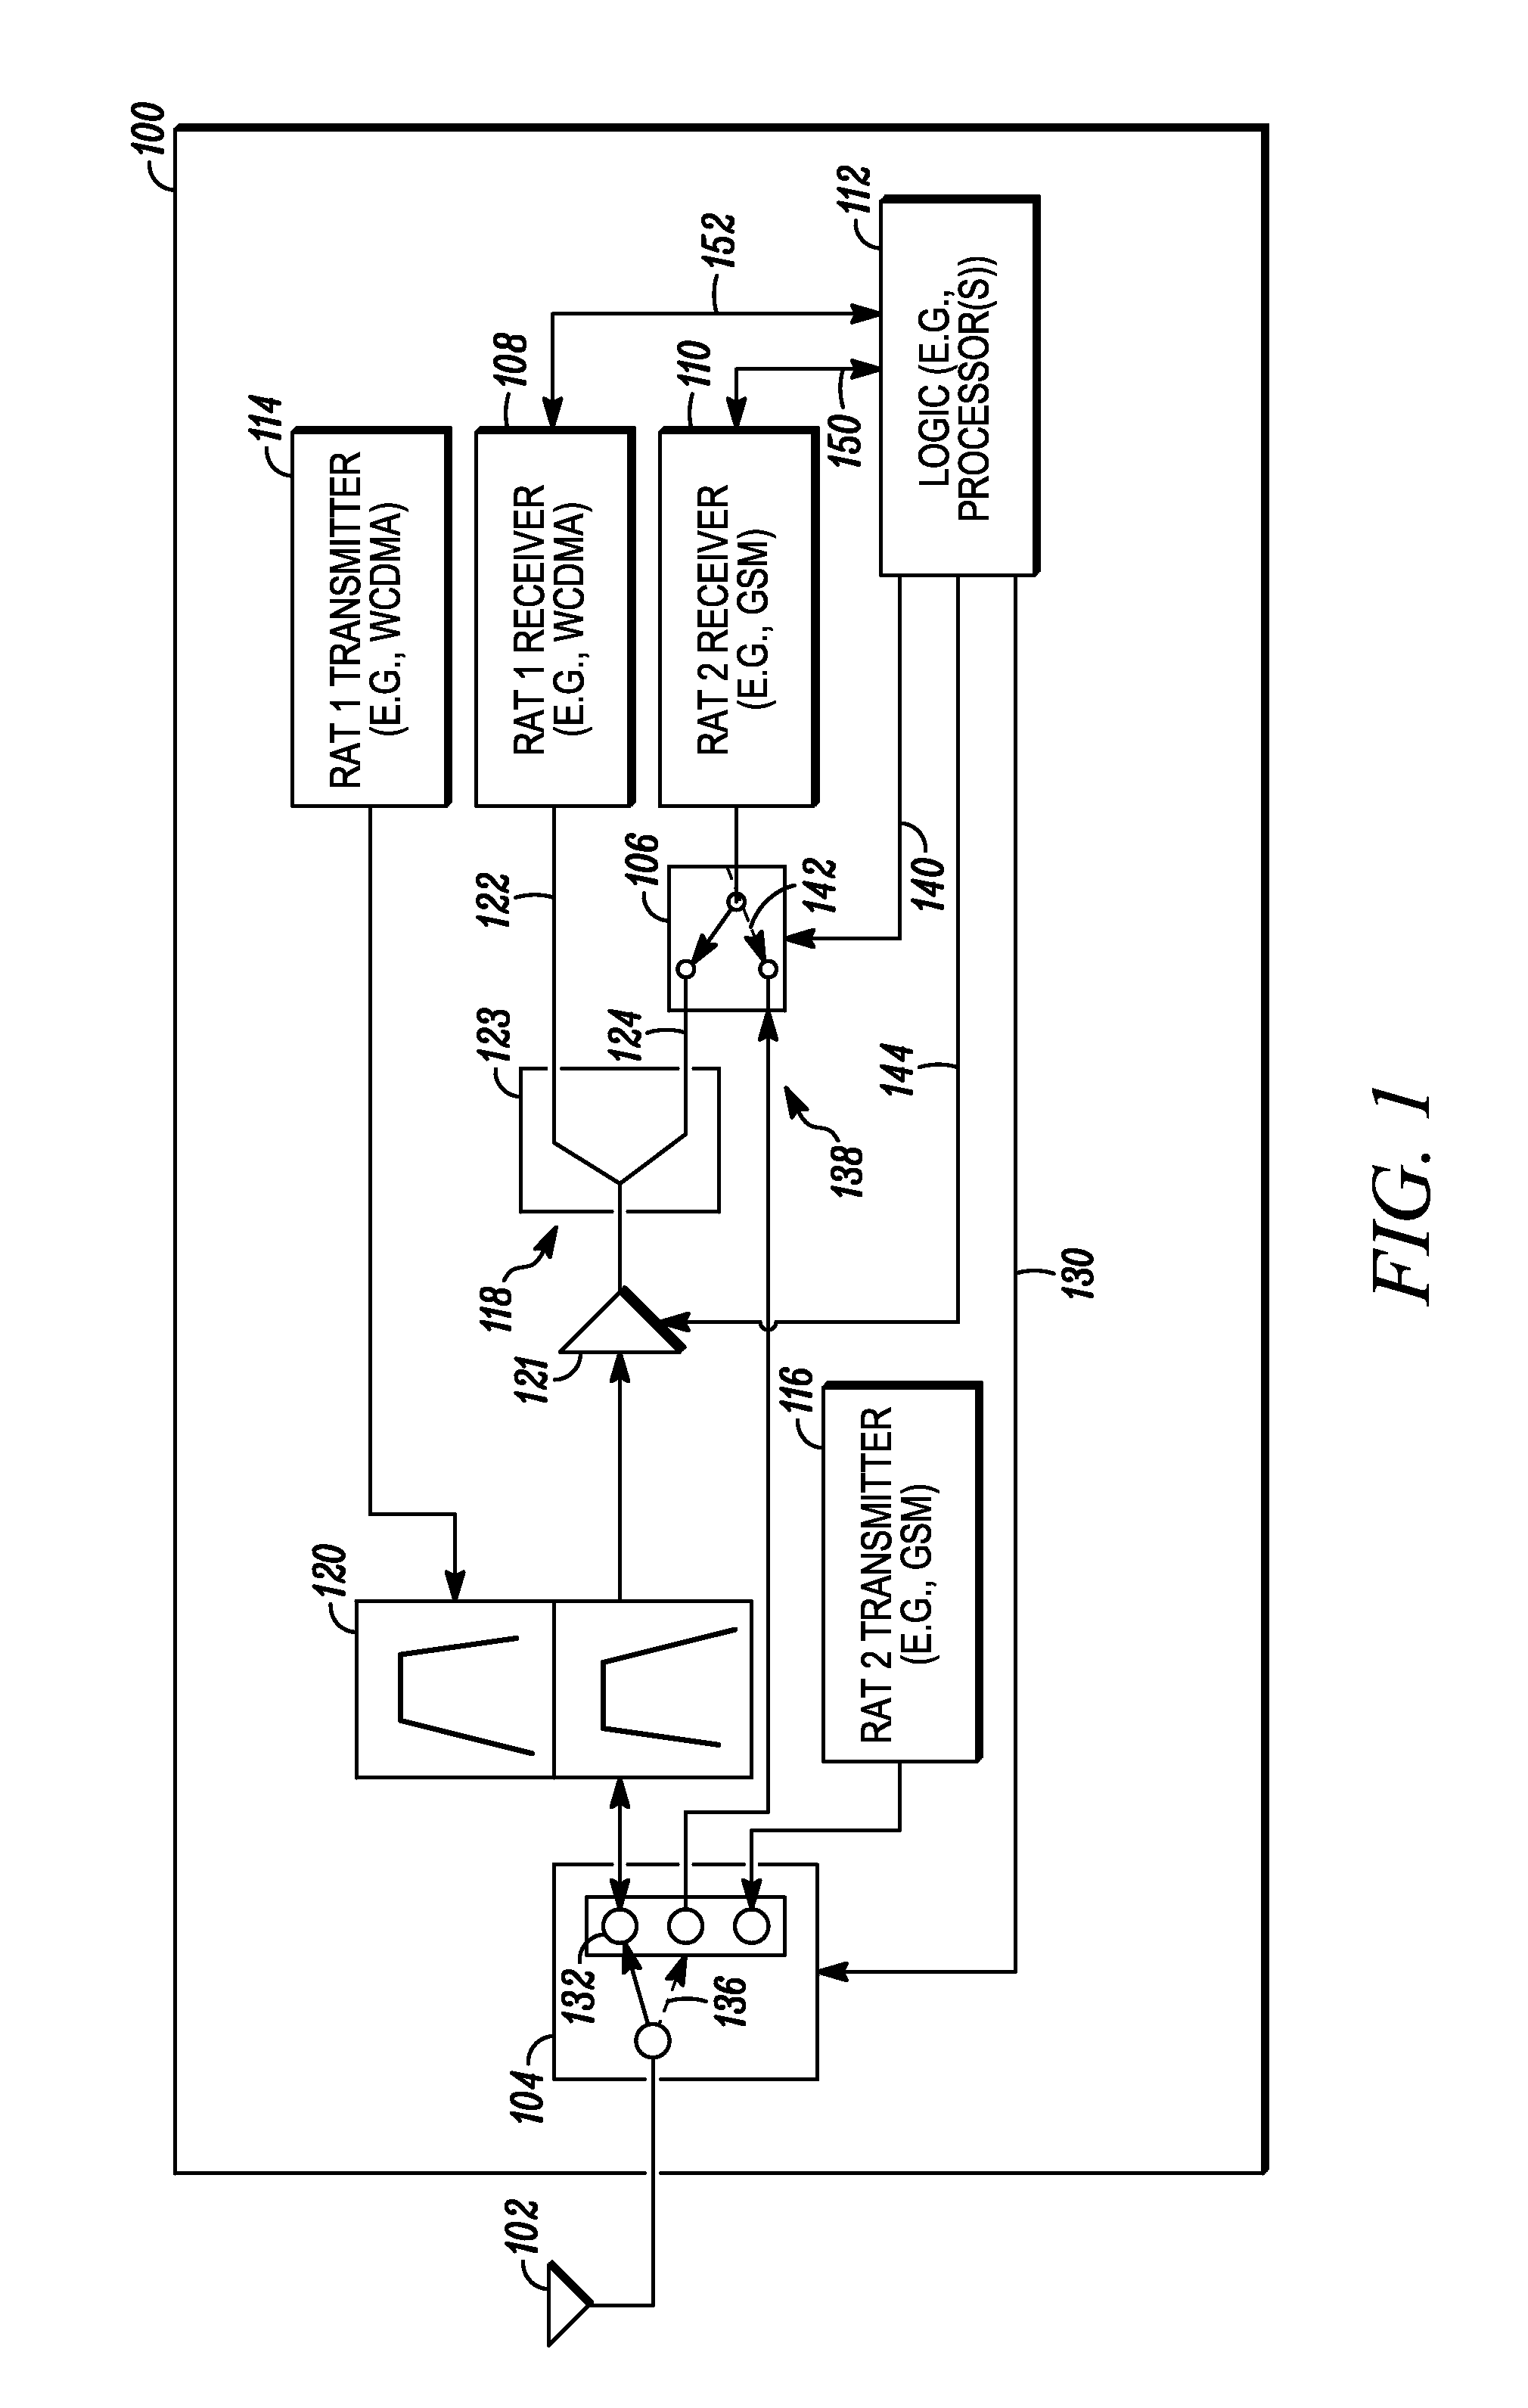 Wireless multimode co-band receiver device and method employing receiver bypass control